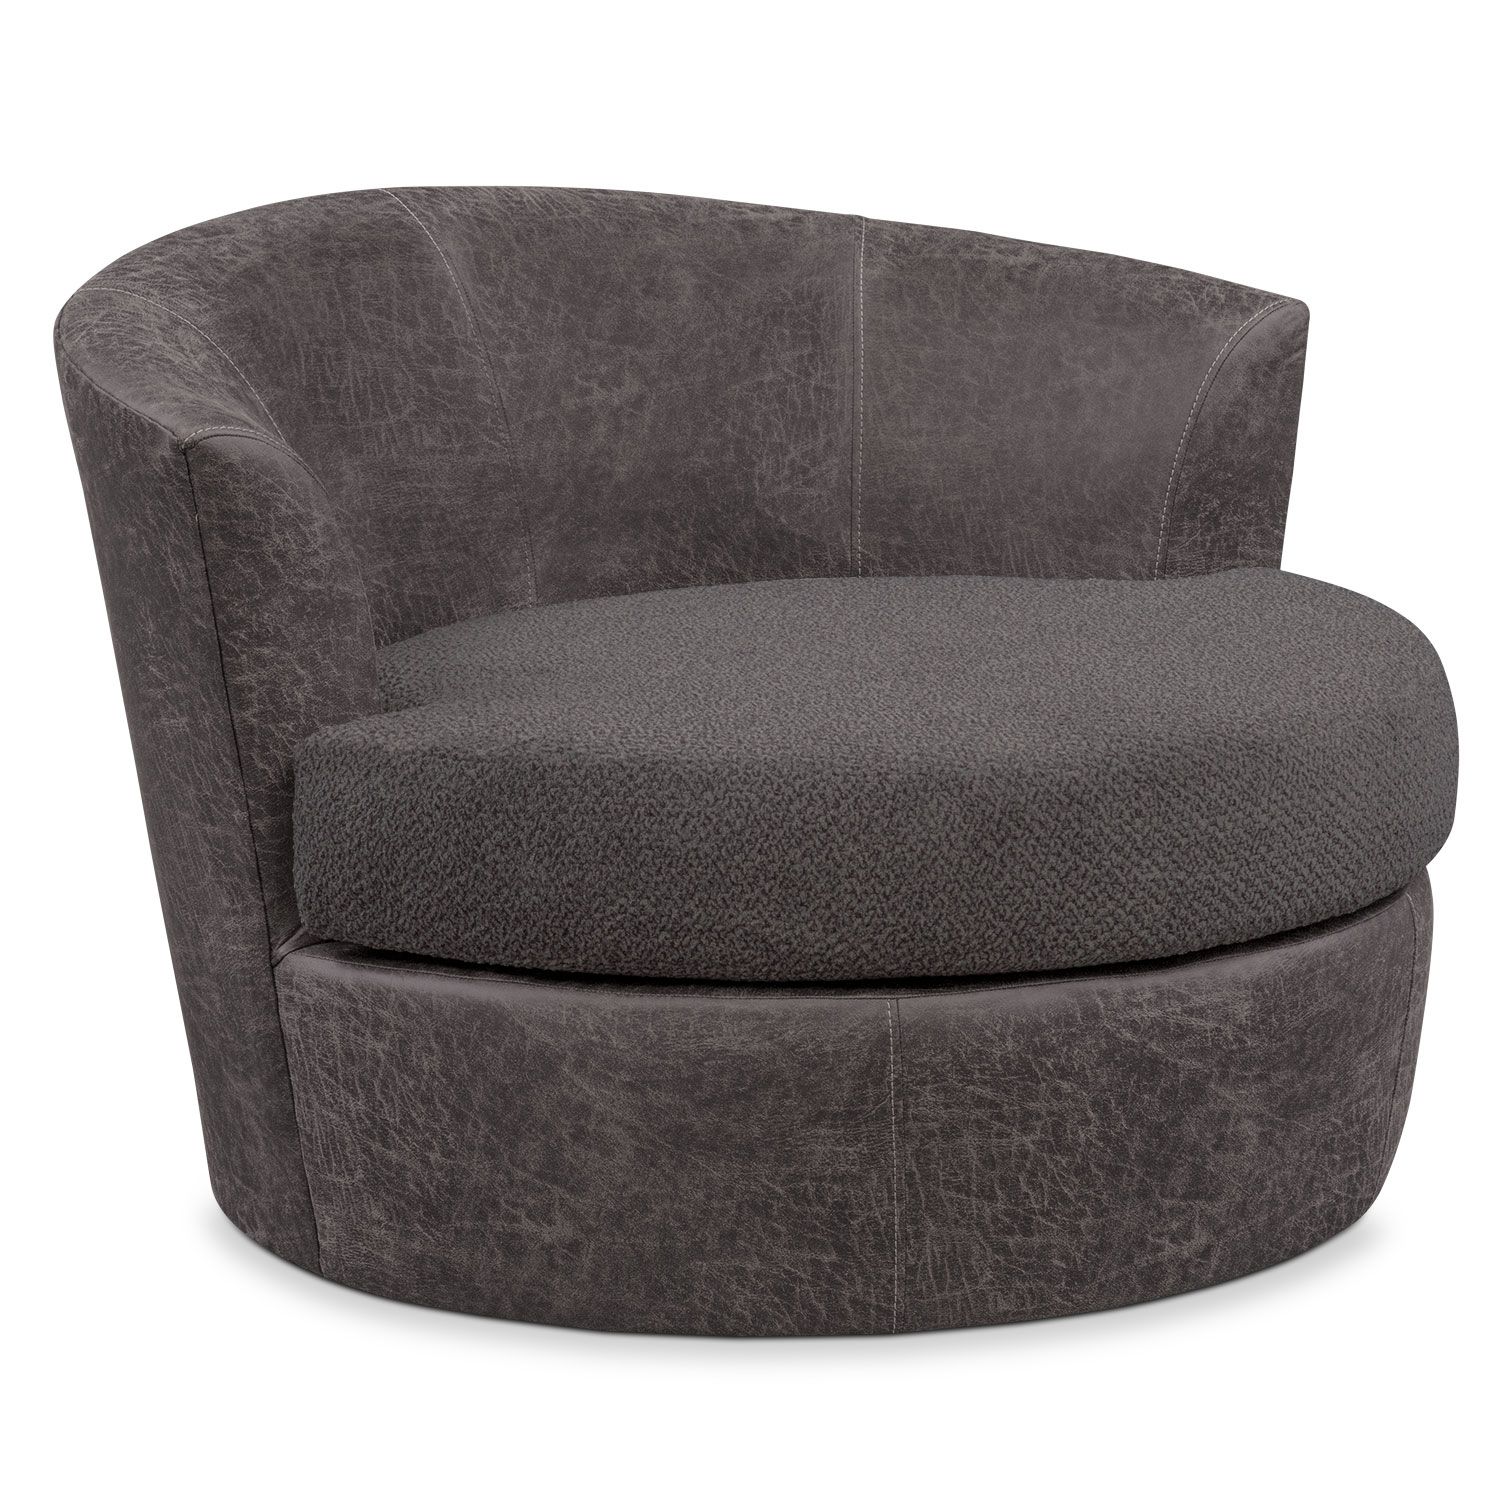 Brando Swivel Swivel Chair | Value City Furniture And Mattresses With Regard To Loft Smokey Swivel Accent Chairs (View 5 of 25)